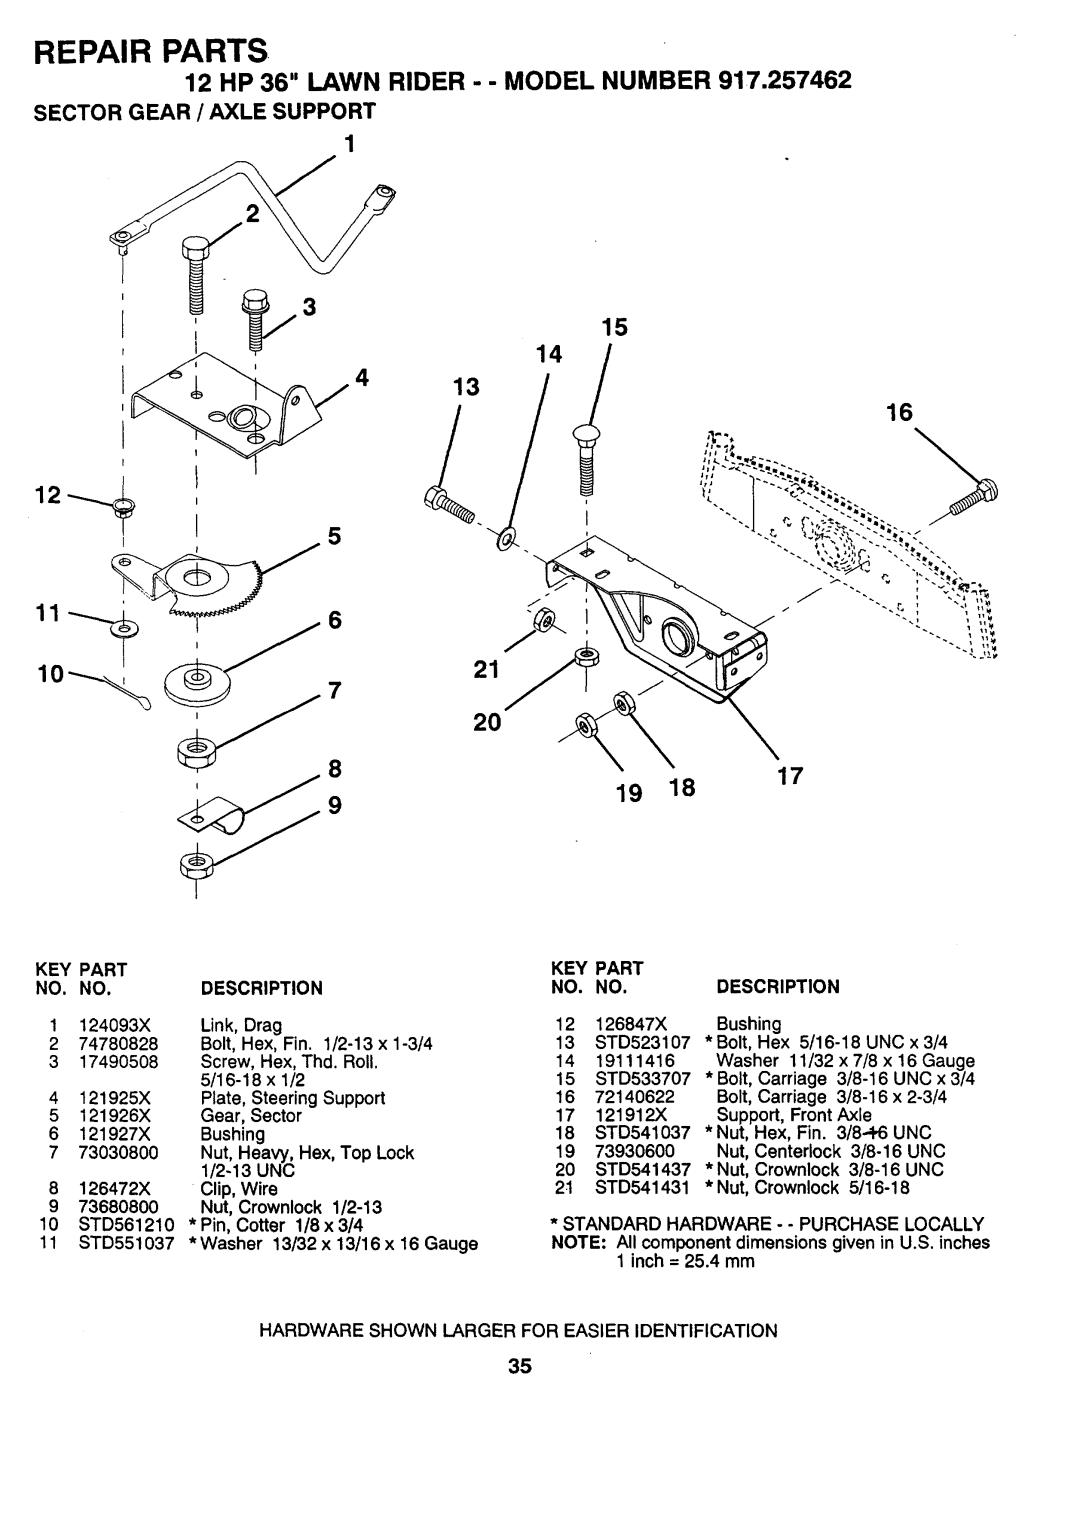 Sears 917.257462 manual Sector Gear / Axle Support, Repair Parts, 12 HP 36 LAWN RIDER - - MODEL NUMBER 